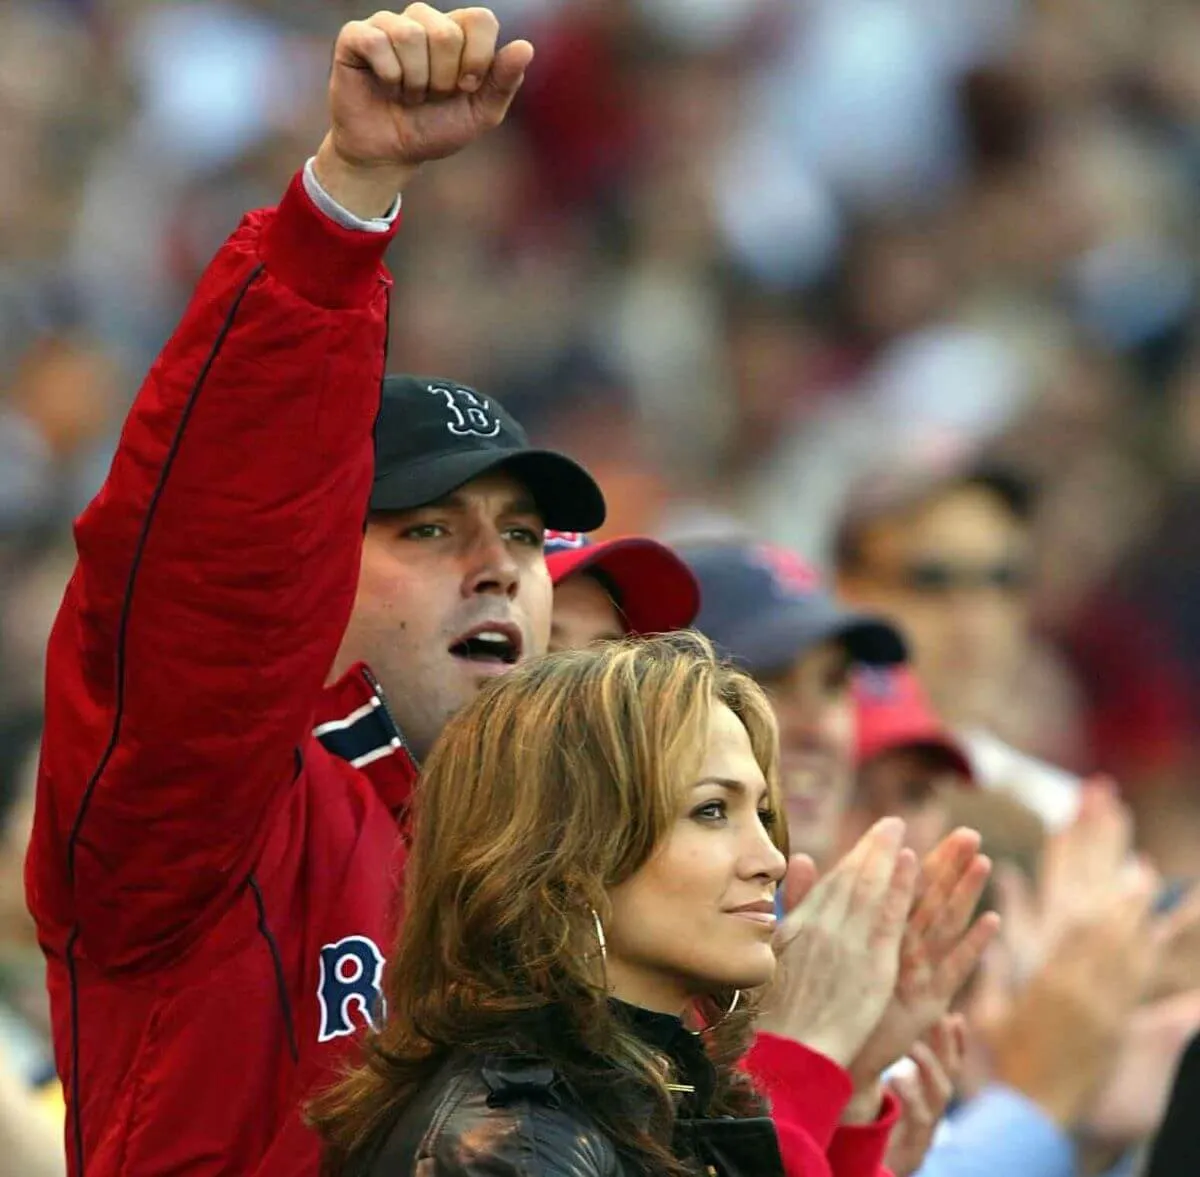 Ben Affleck wears a Red Sox jacket and baseball hat. He lifts his arm into the air at a baseball game. Jennifer Lopez stands next to him wearing a black jacket.